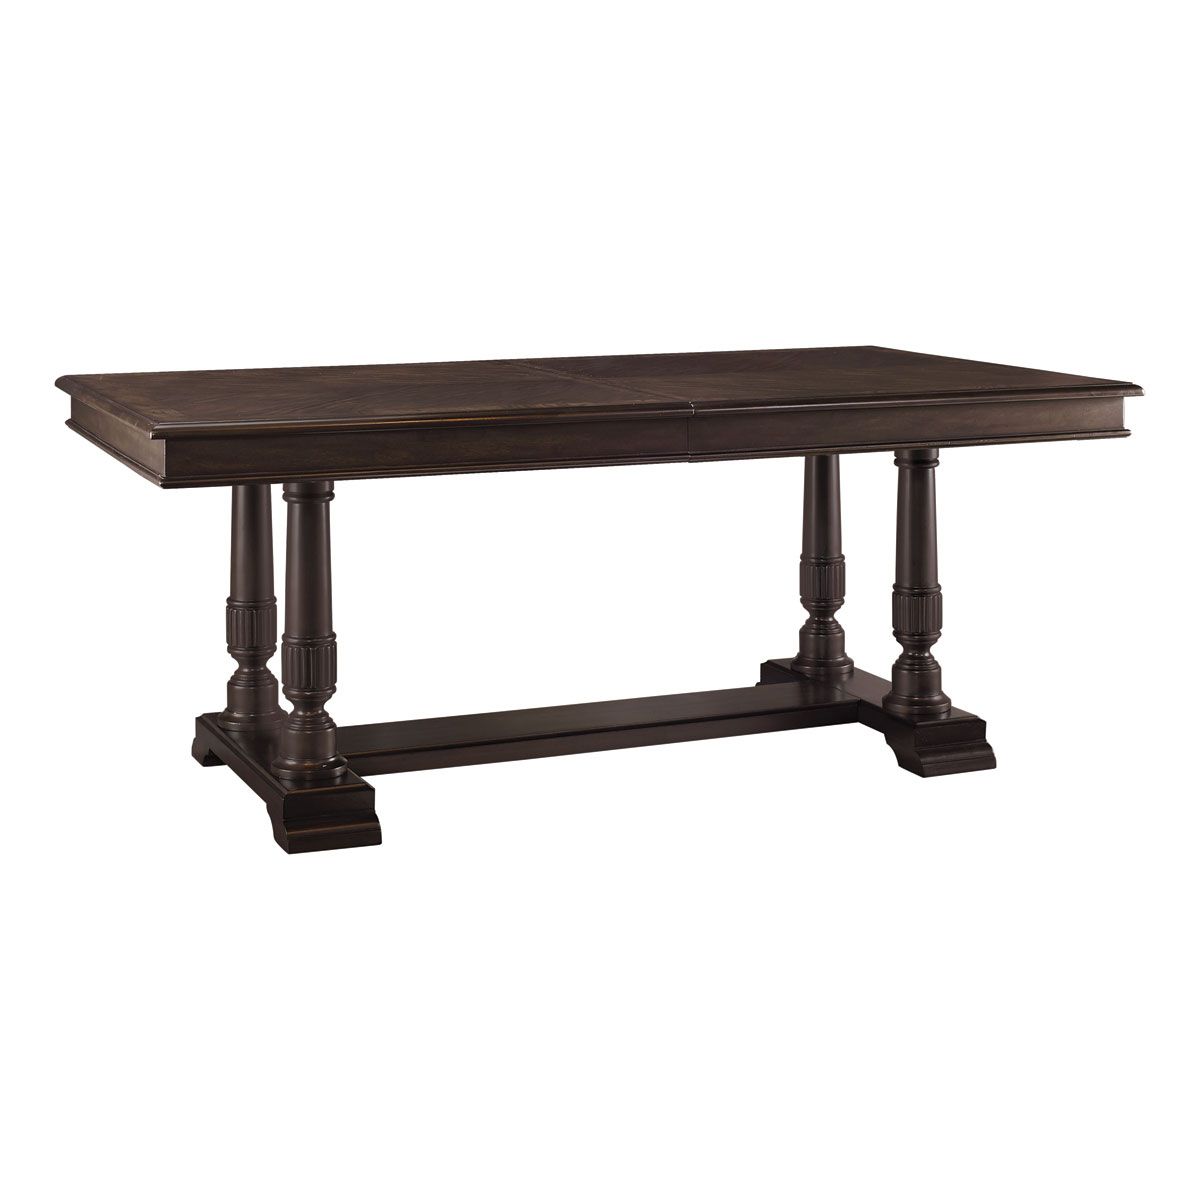 BRENTWOOD DINING TABLE | Badcock Home Furniture &more